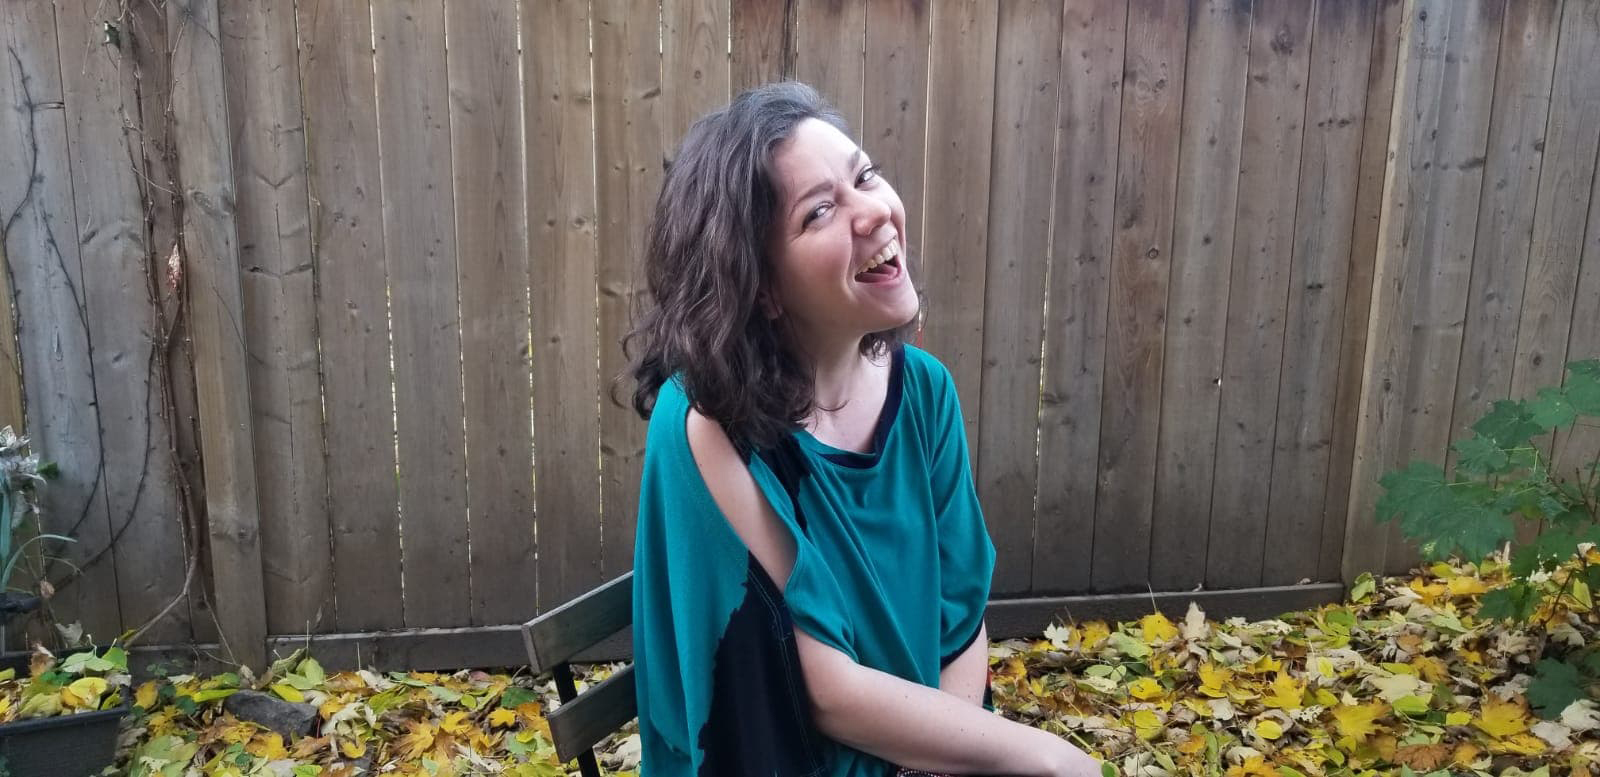 Hannah sits outside in autumn, smiling in front of a wooden fence.